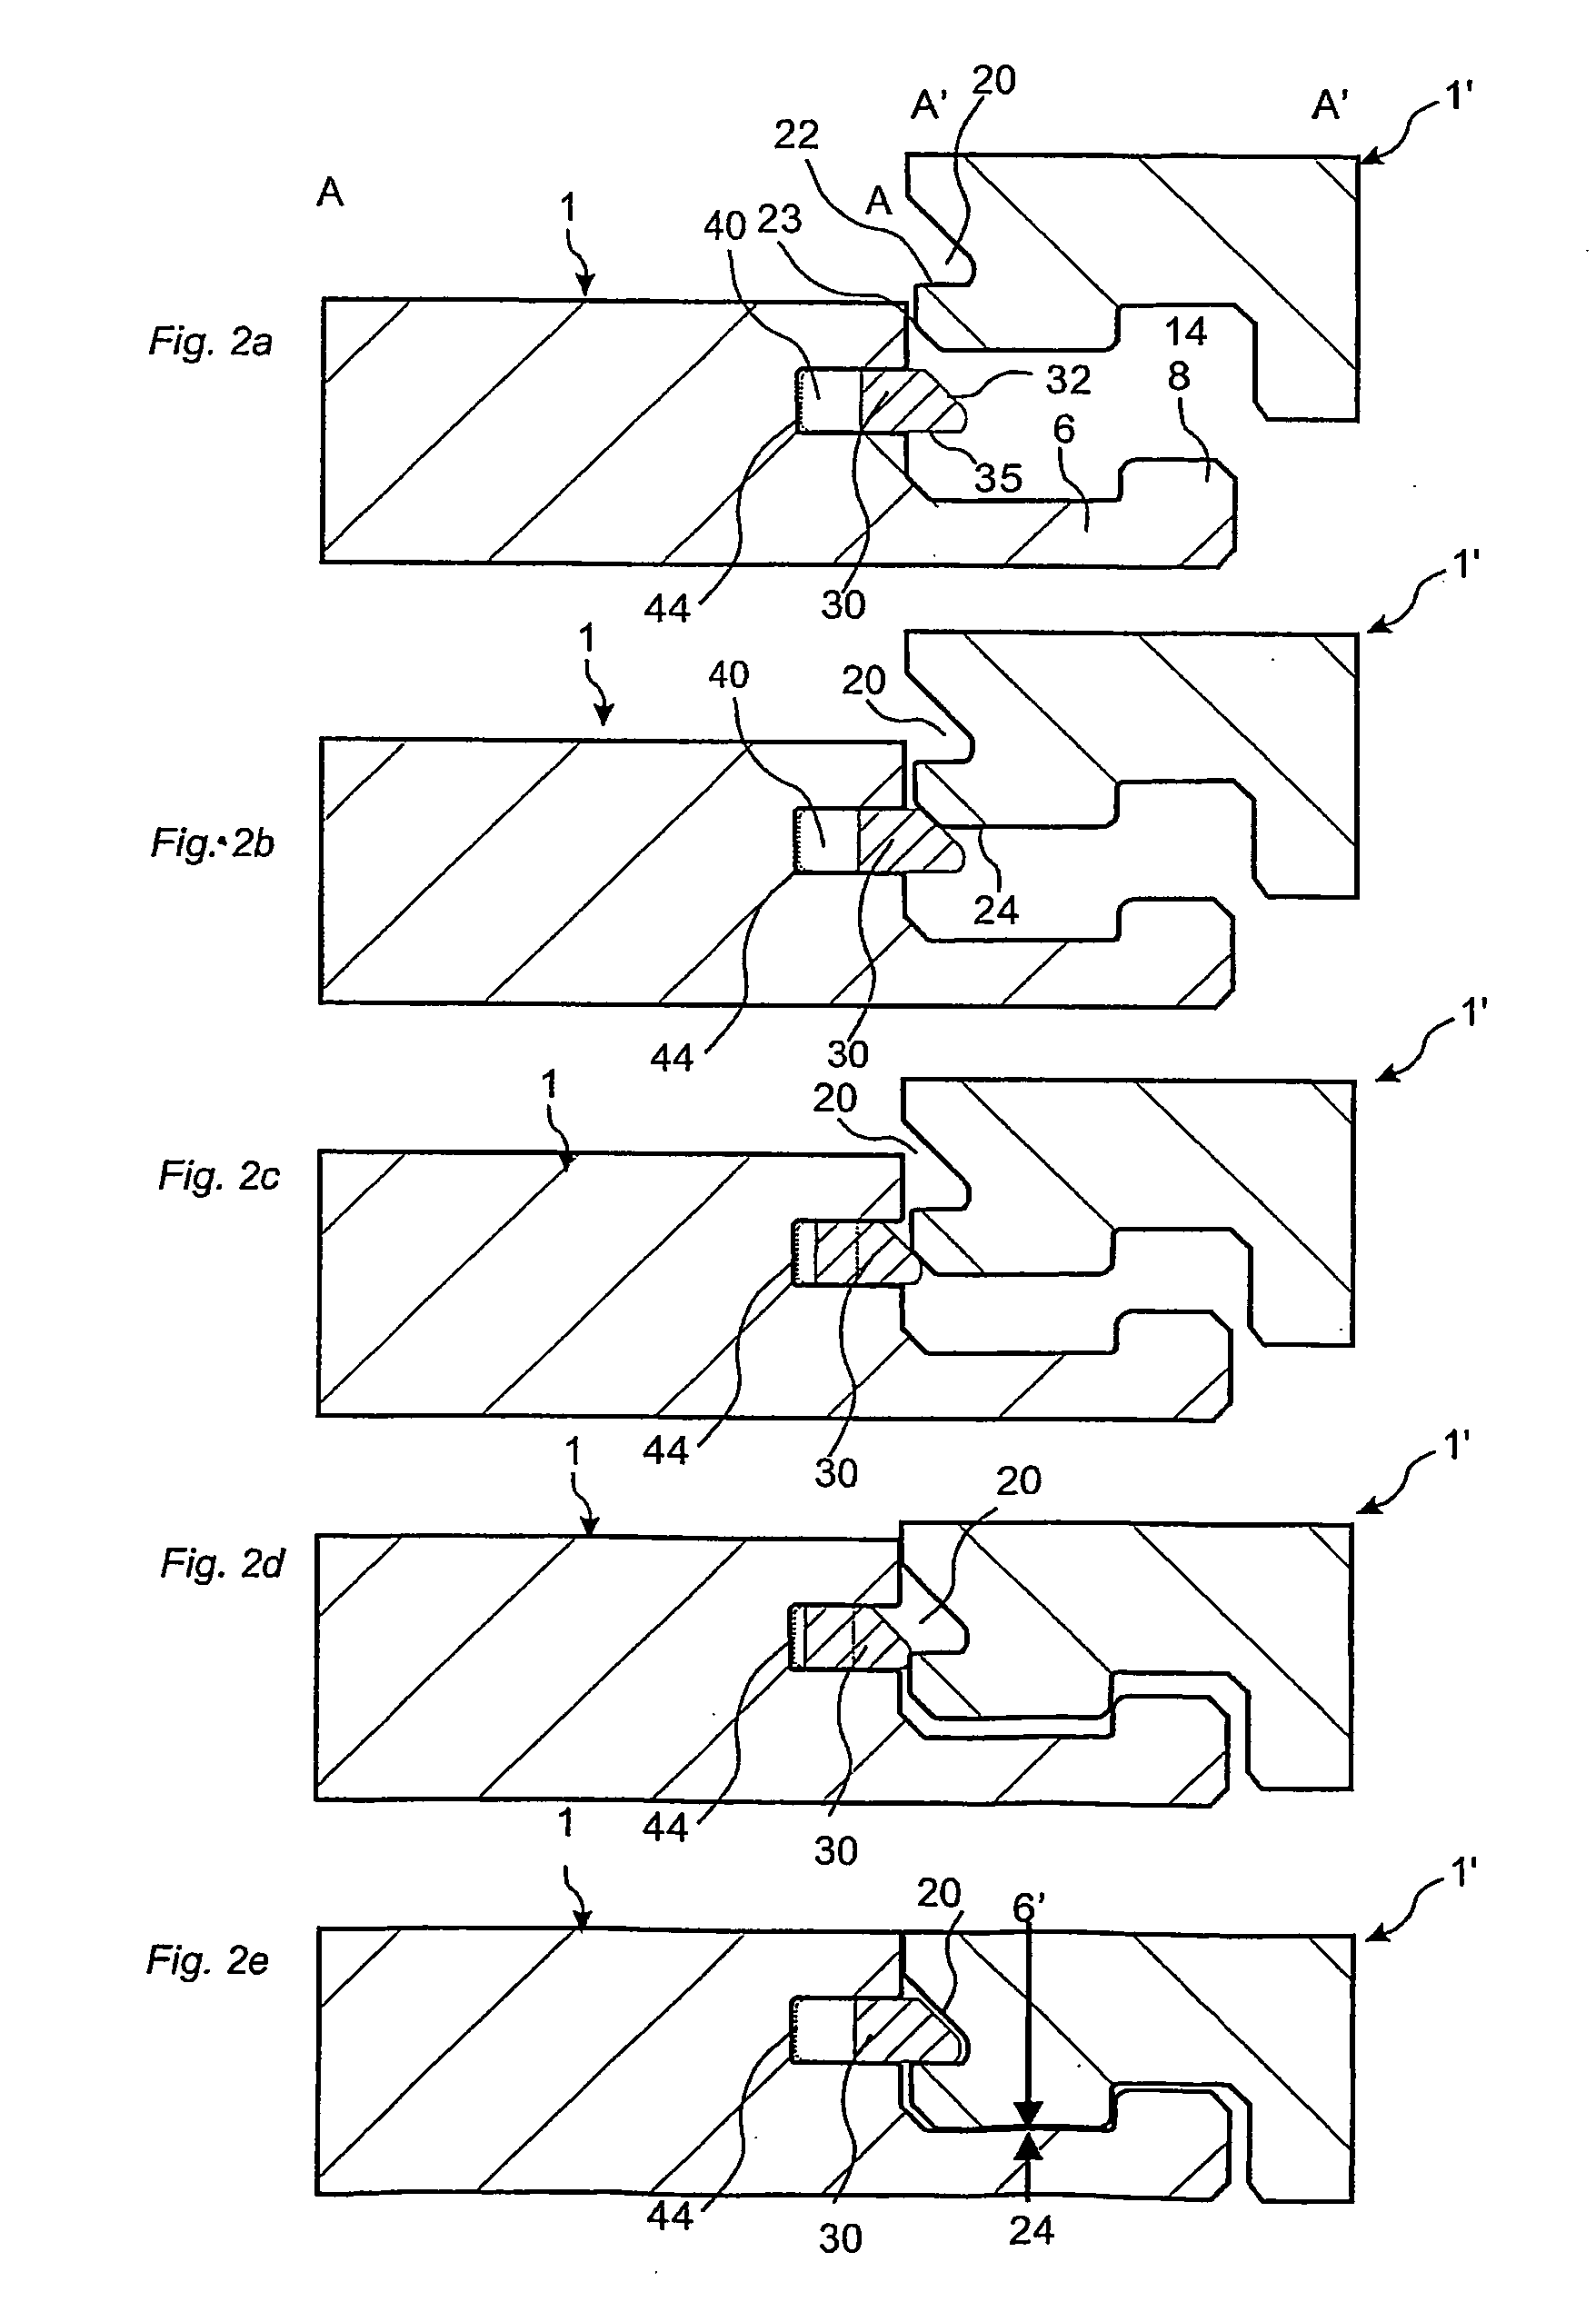 Mechanical locking of floor panels with a flexible tongue